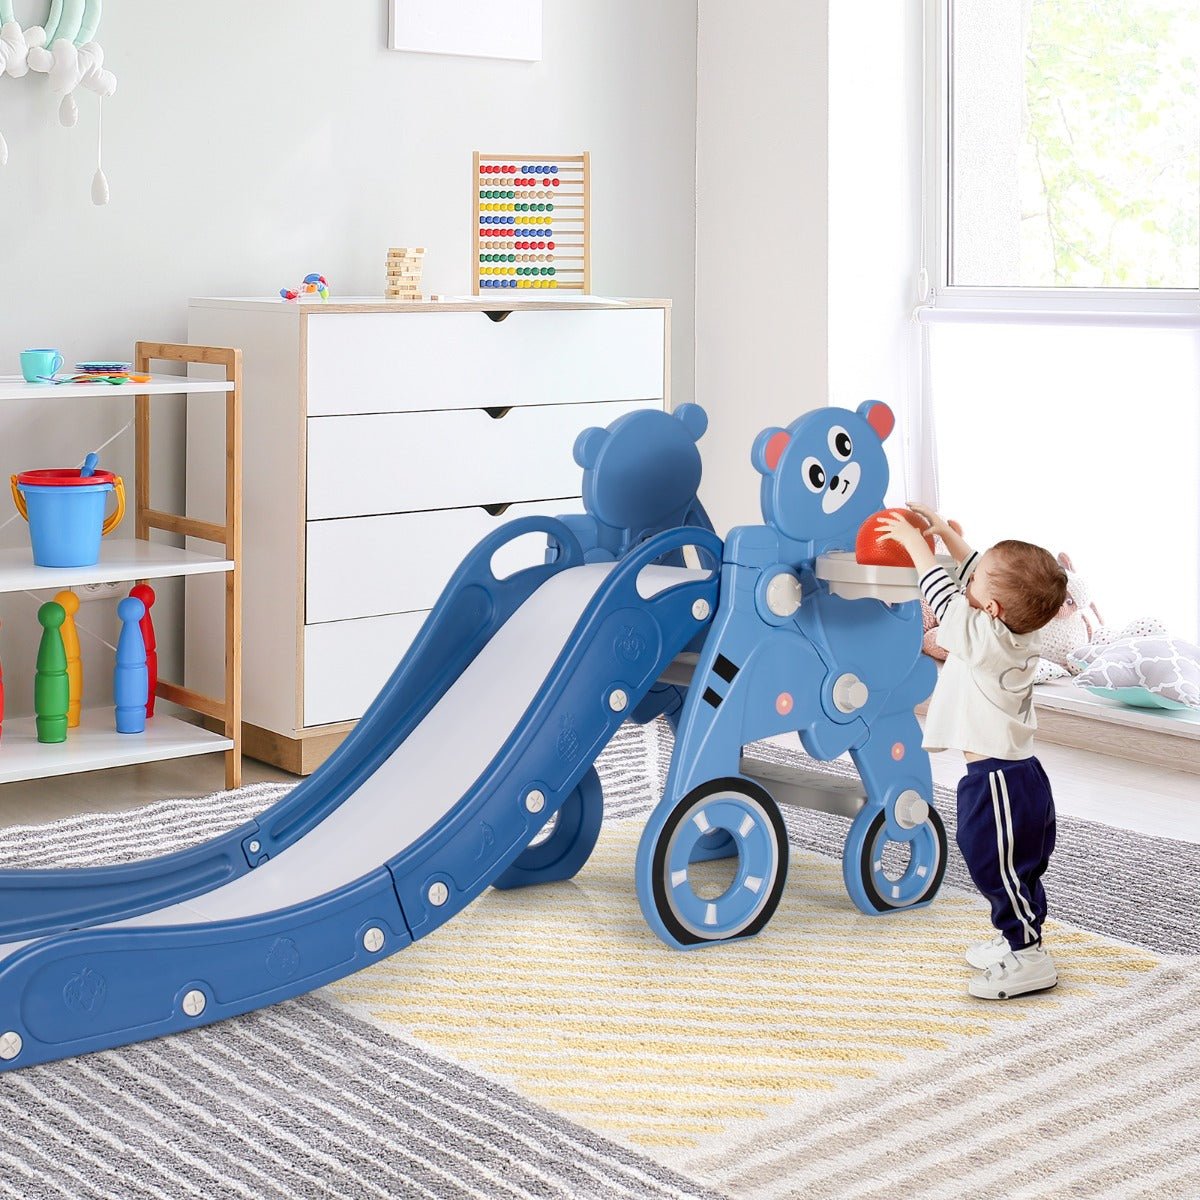 Foldable Baby Slide Climber with Basketball Hoop - Blue